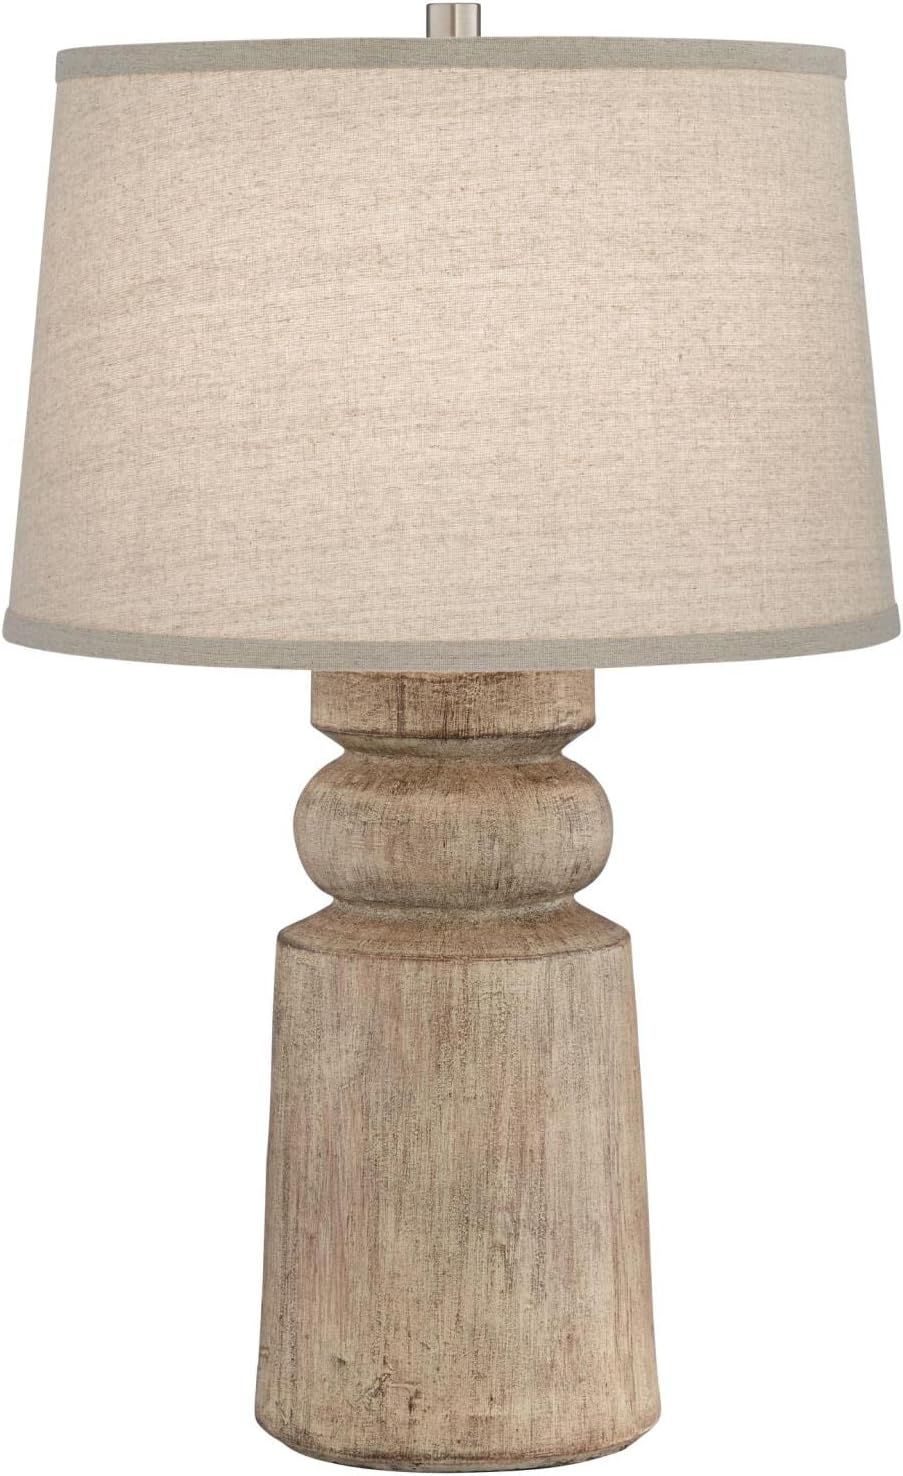 Universal Lighting and Decor Totem Natural Faux Wood Table Lamp | Amazon (US)